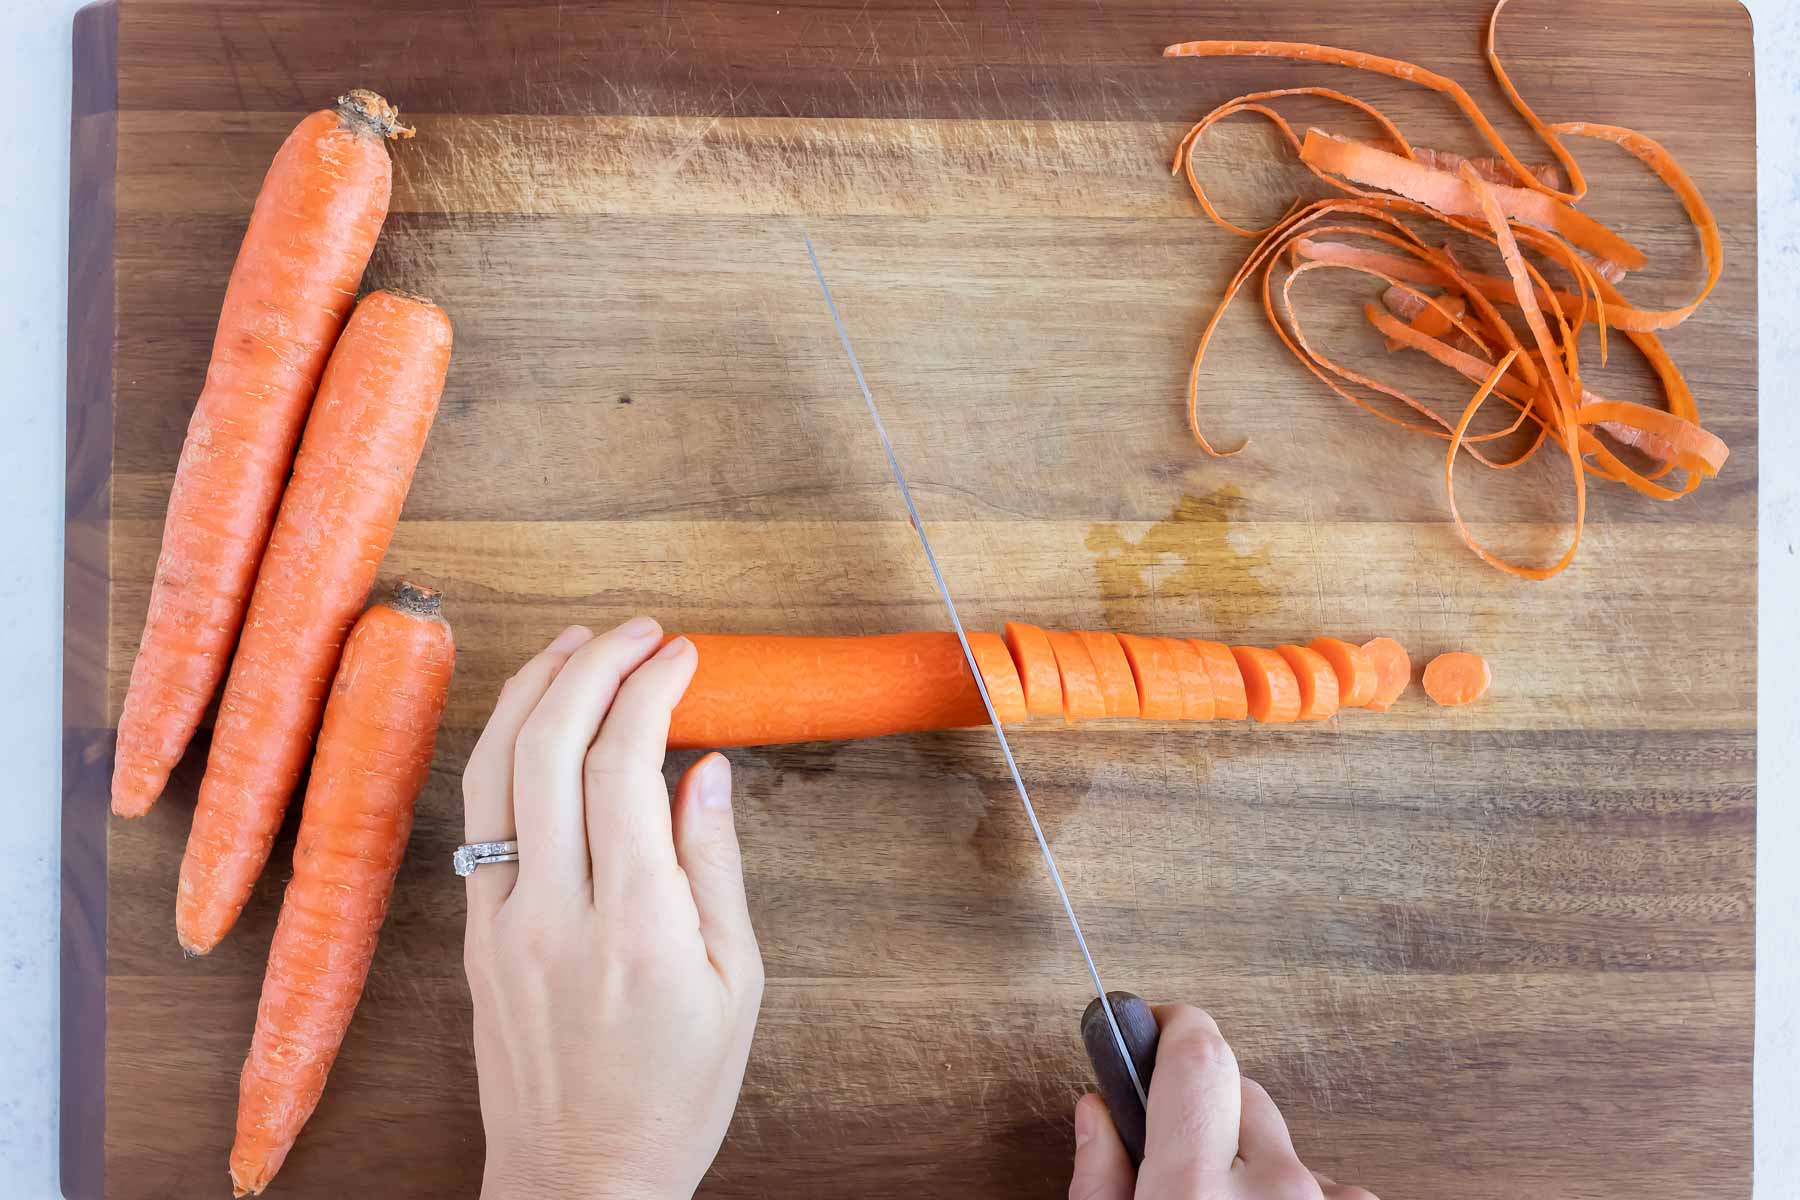 Carrots are sliced on a cutting board before boiling.